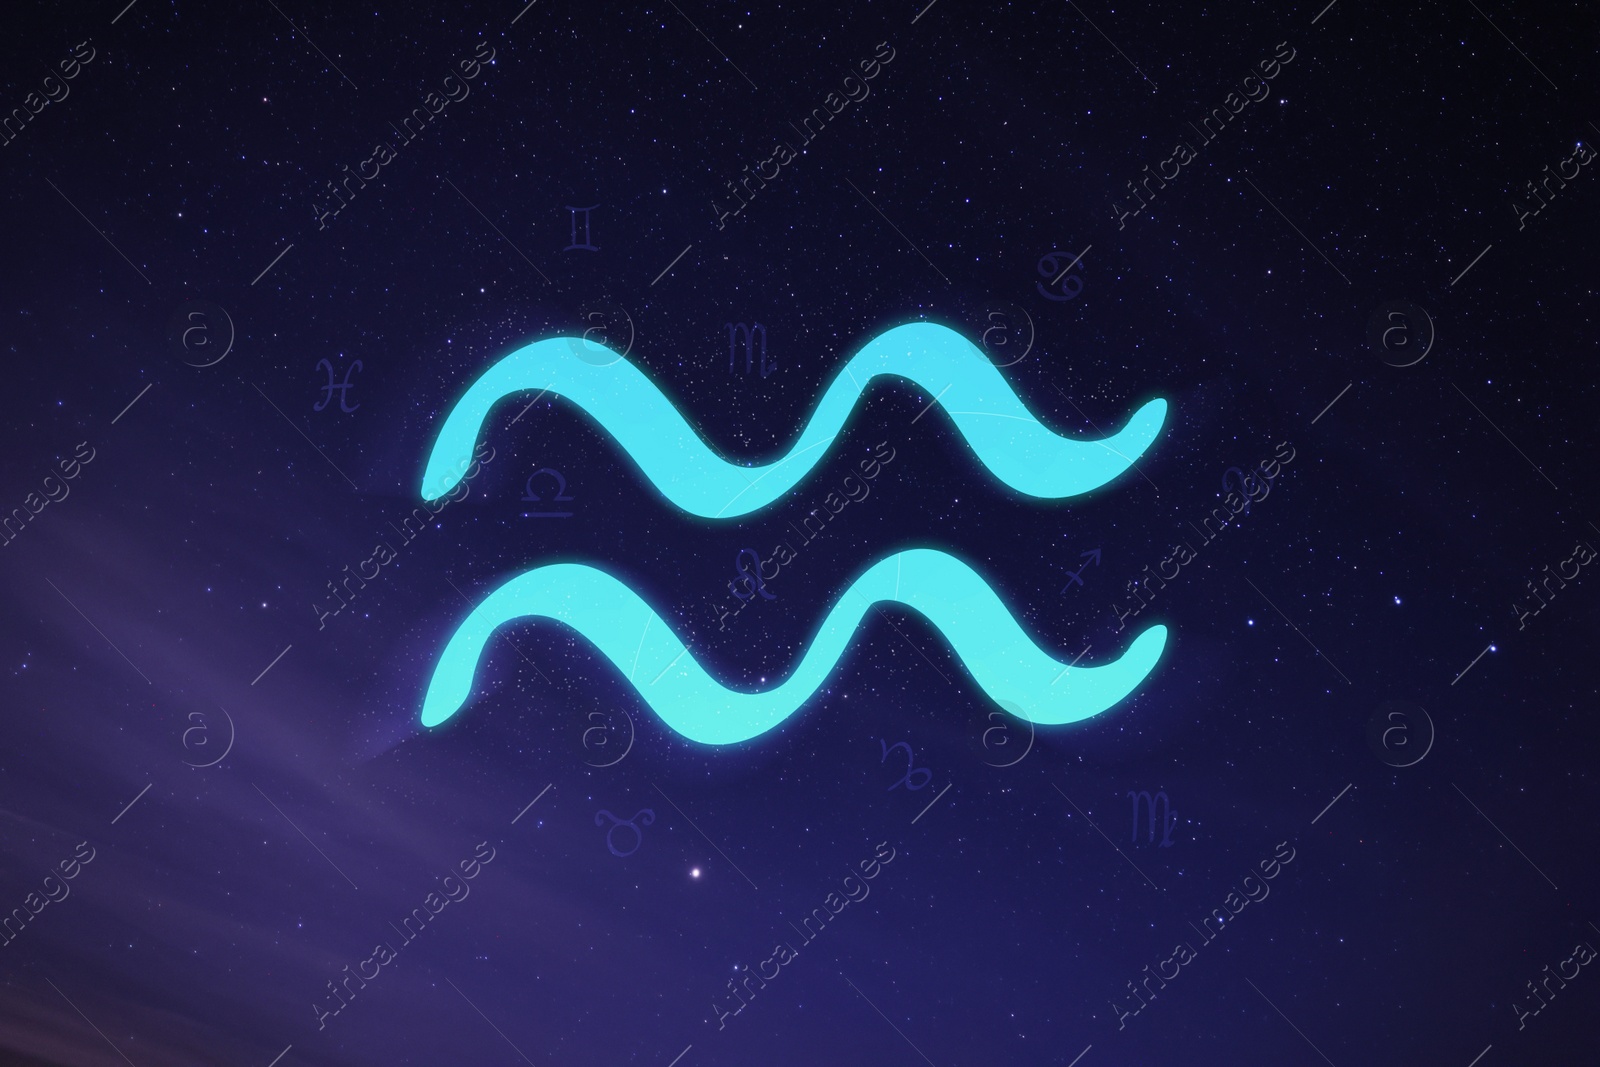 Illustration of Aquarius astrological sign in night sky with beautiful sky